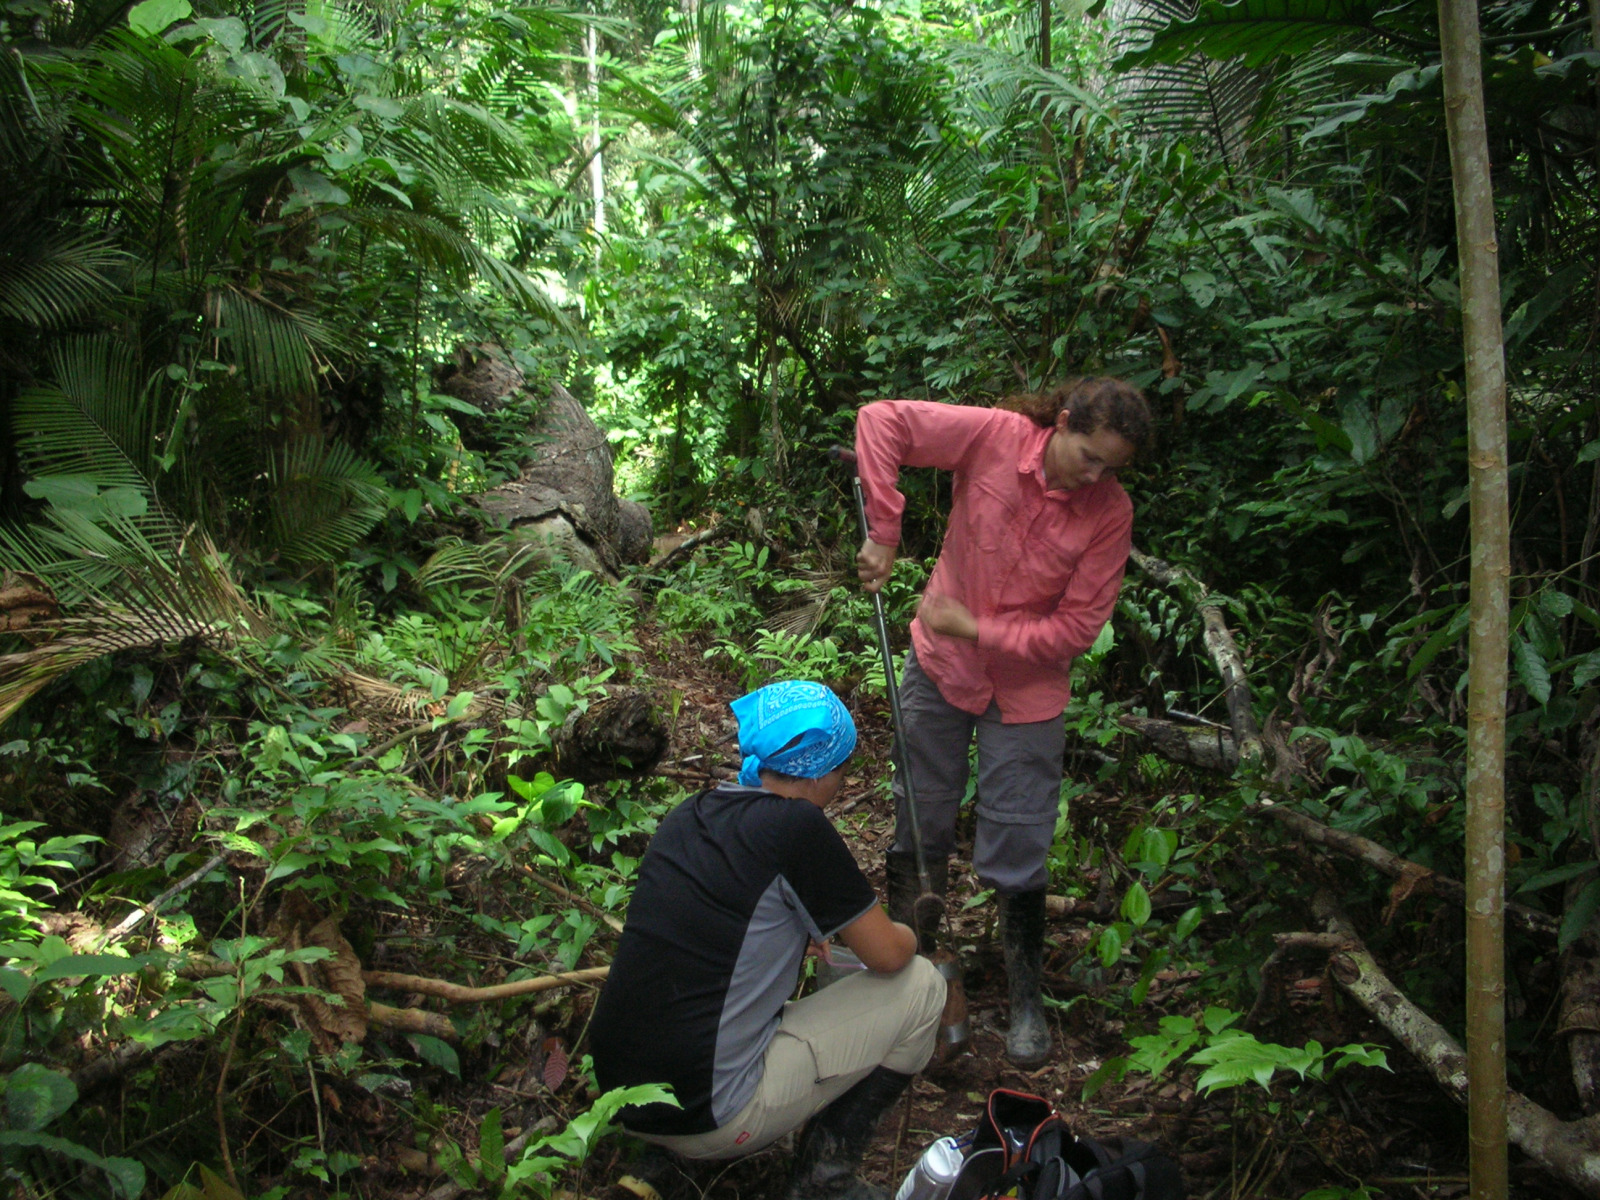 Crystal McMichael and Monica Zimmerman augur for soil cores in the Amazon.